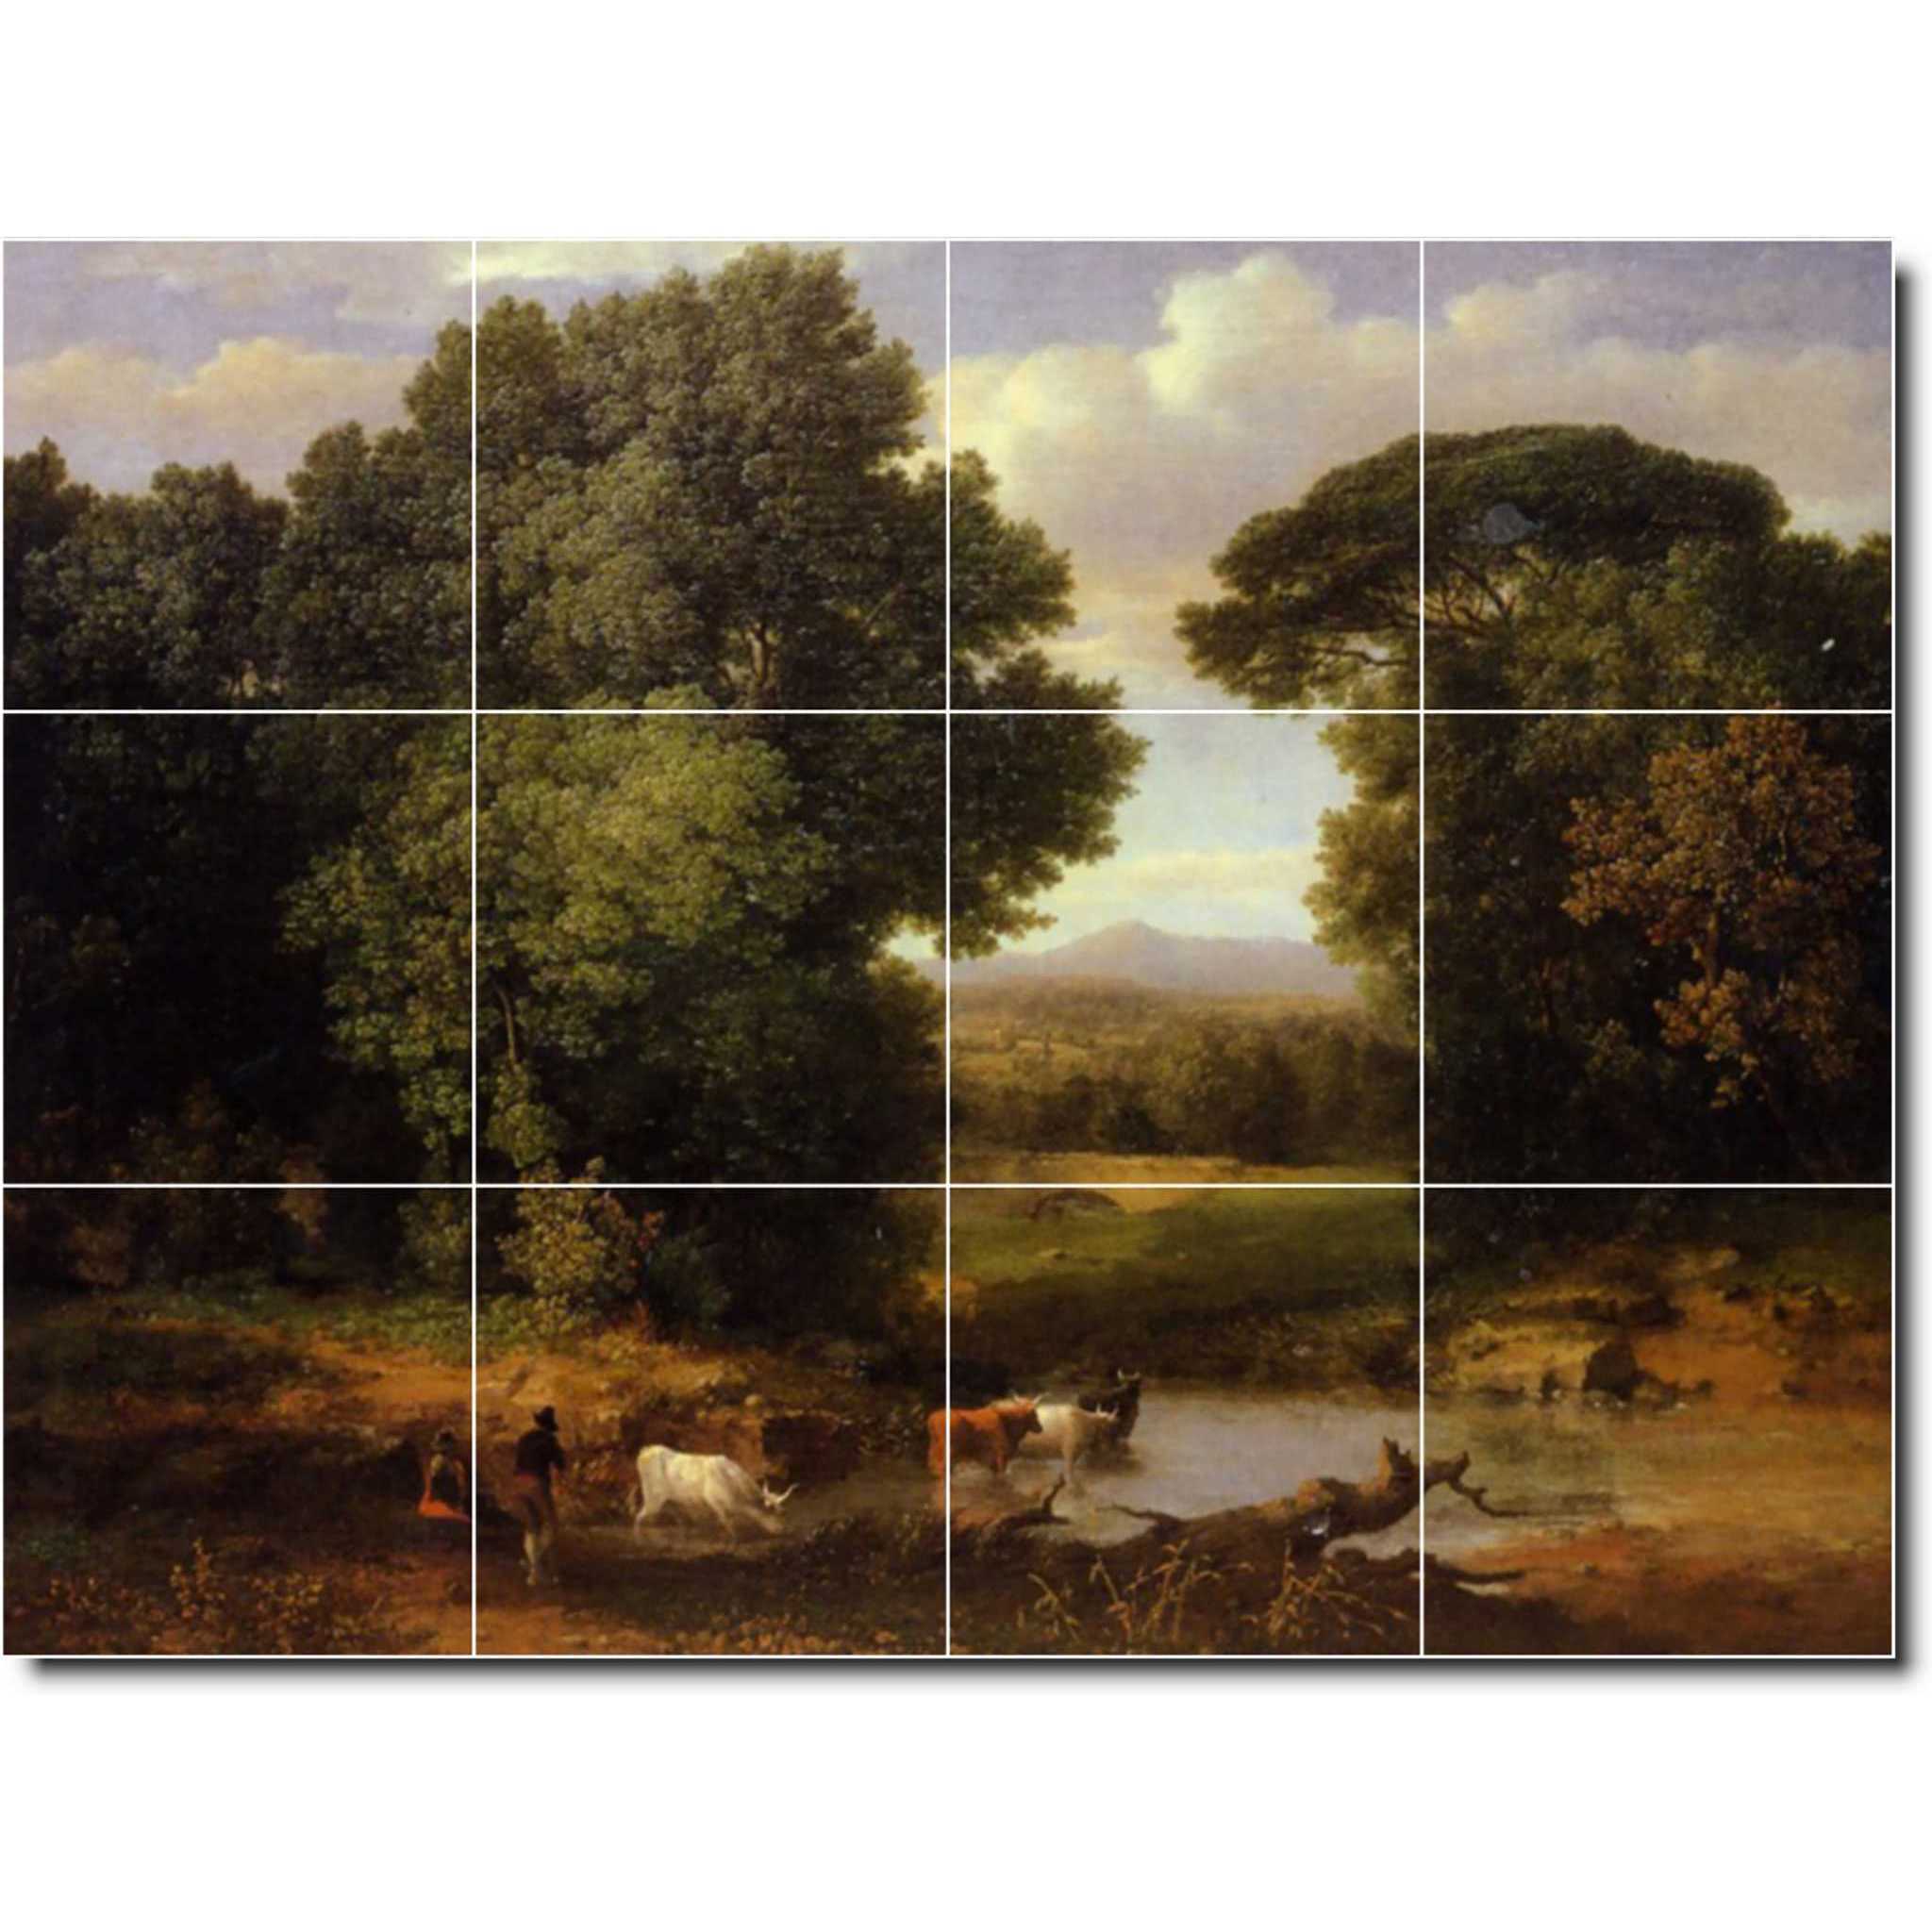 george inness country painting ceramic tile mural p04764